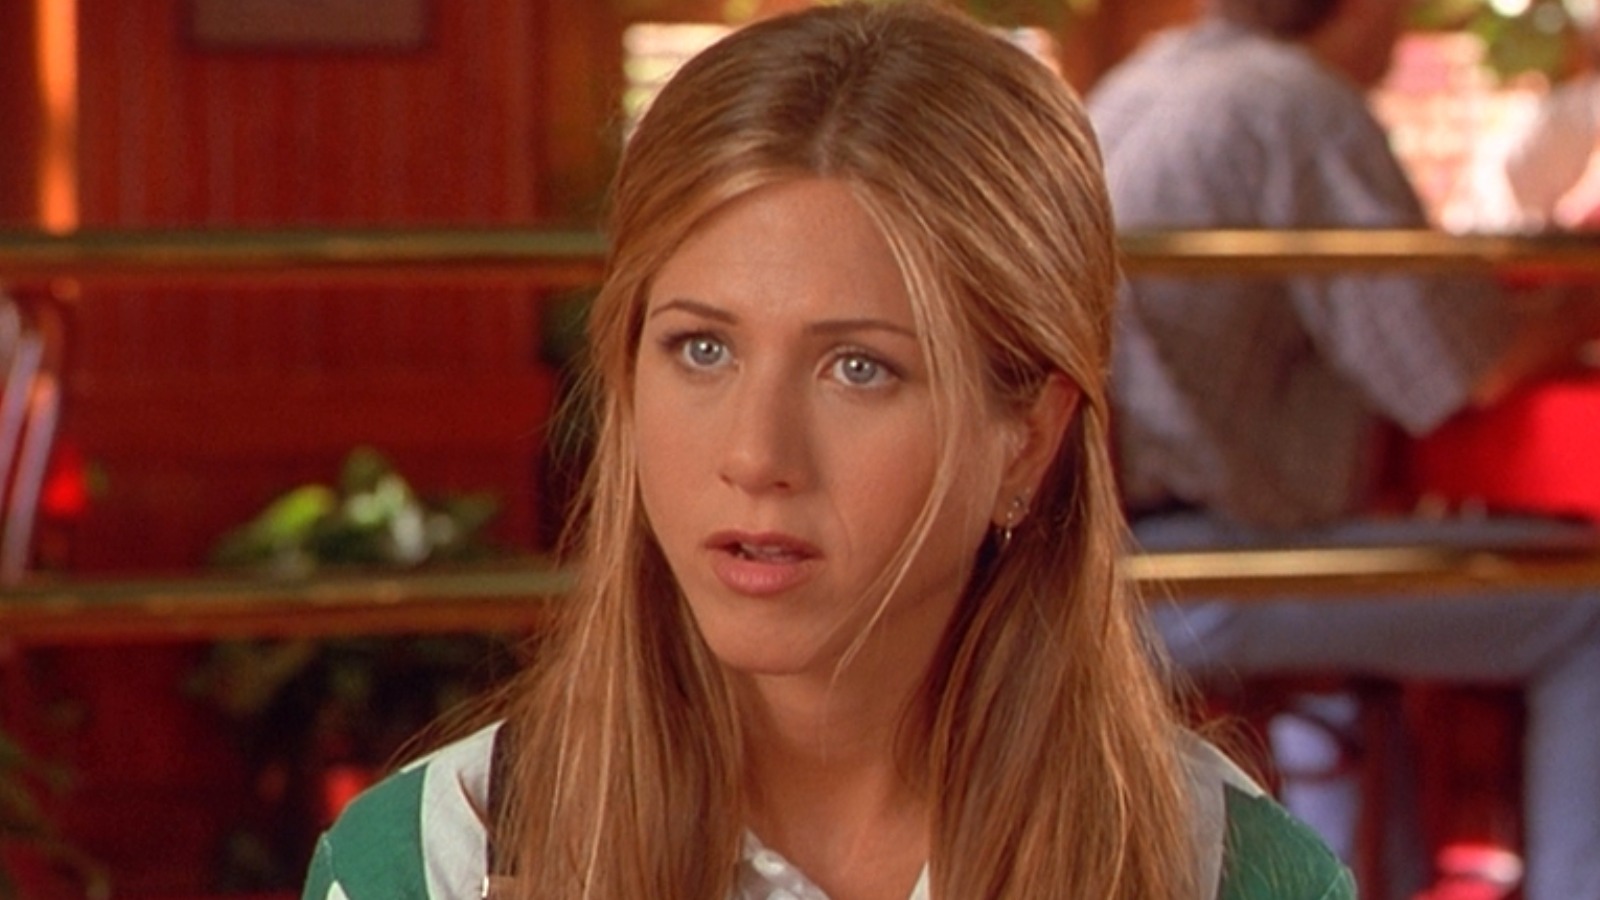 Jennifer Aniston's Highest-Rated Movies Are All Comedies, According To IMDb